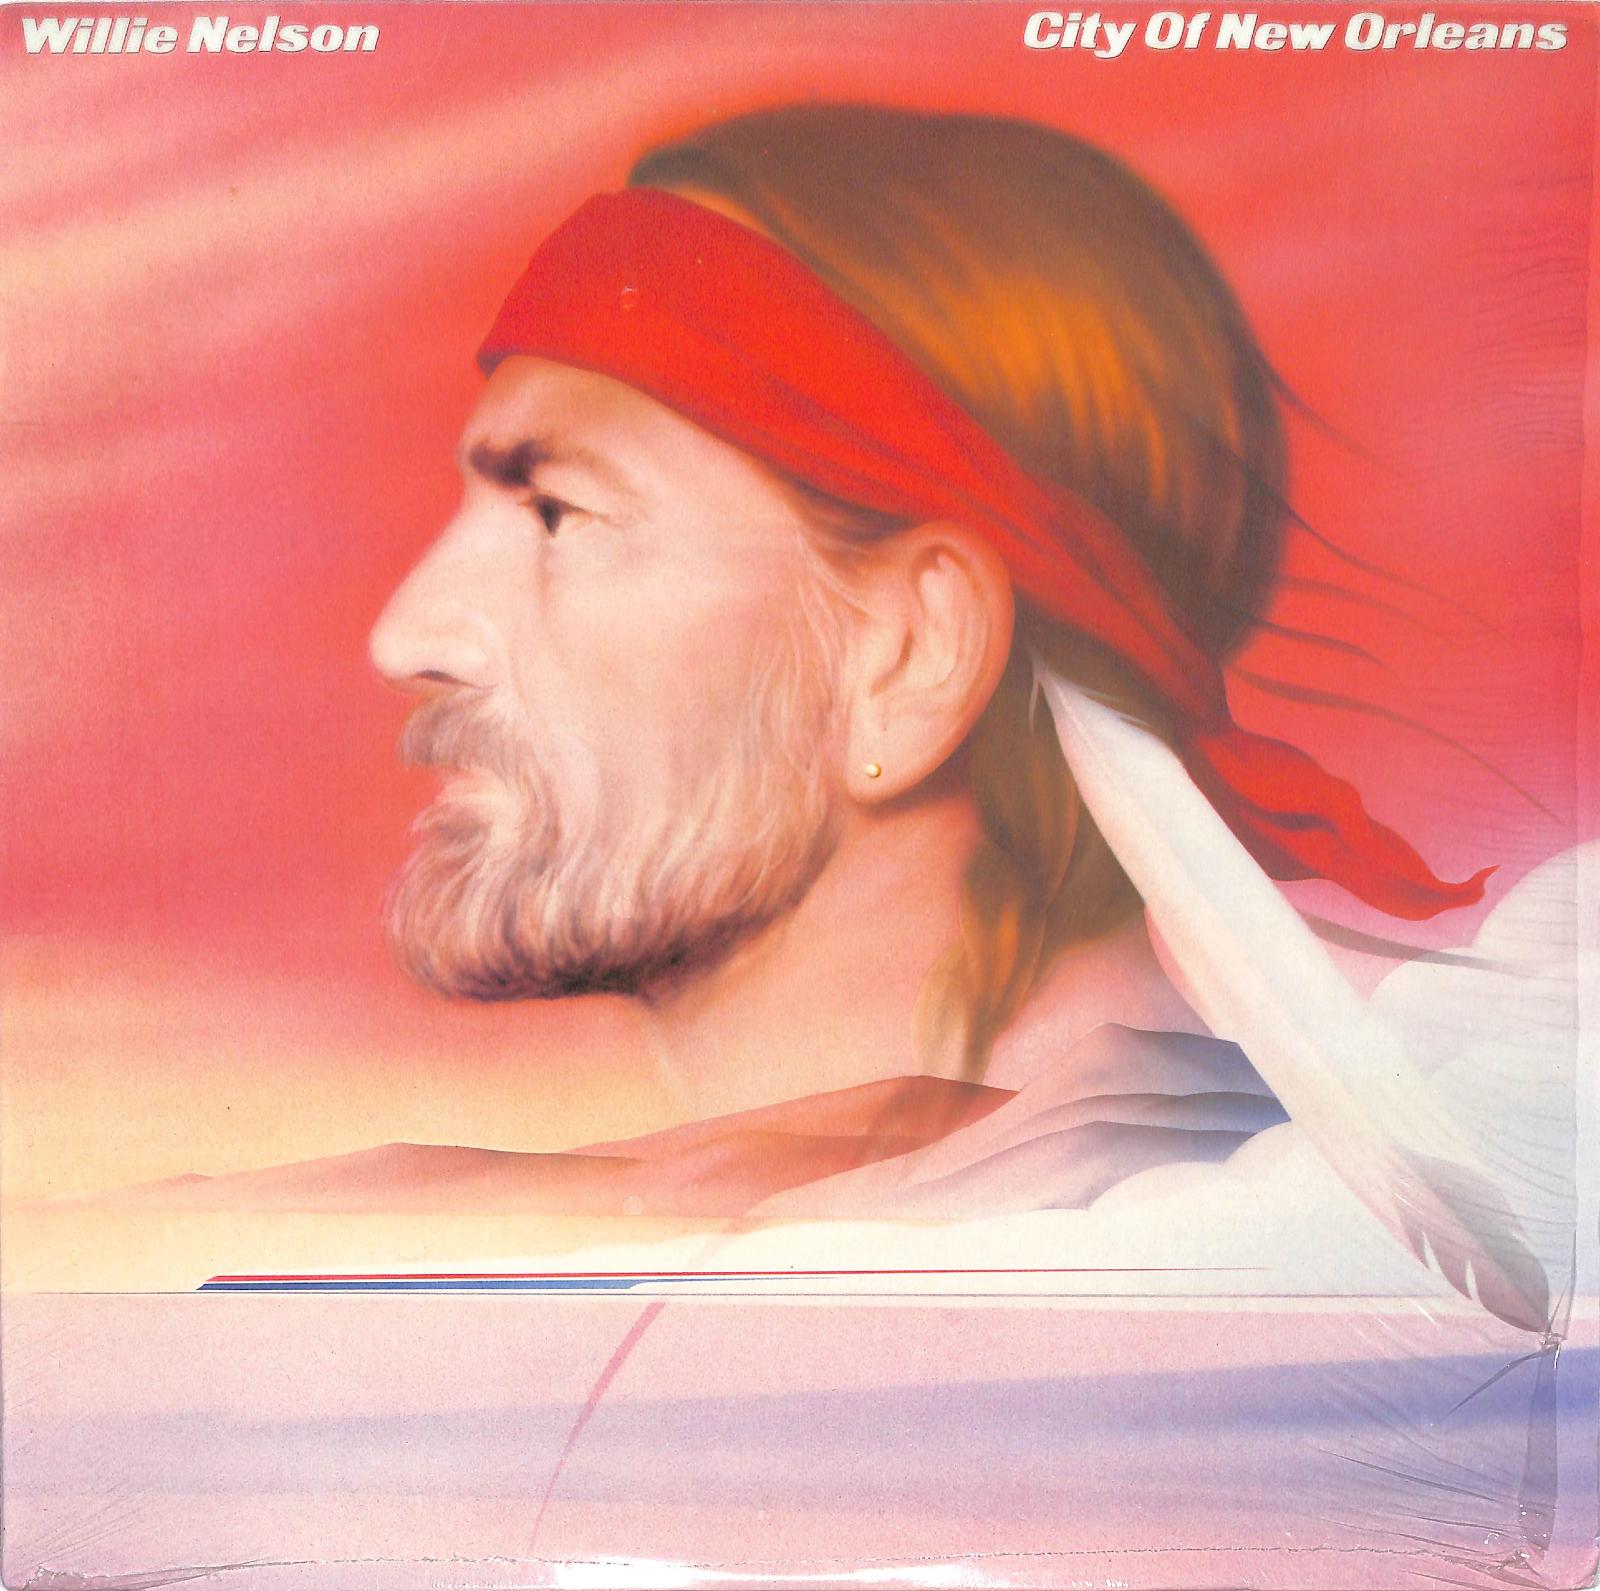 WILLIE NELSON - City Of New Orleans